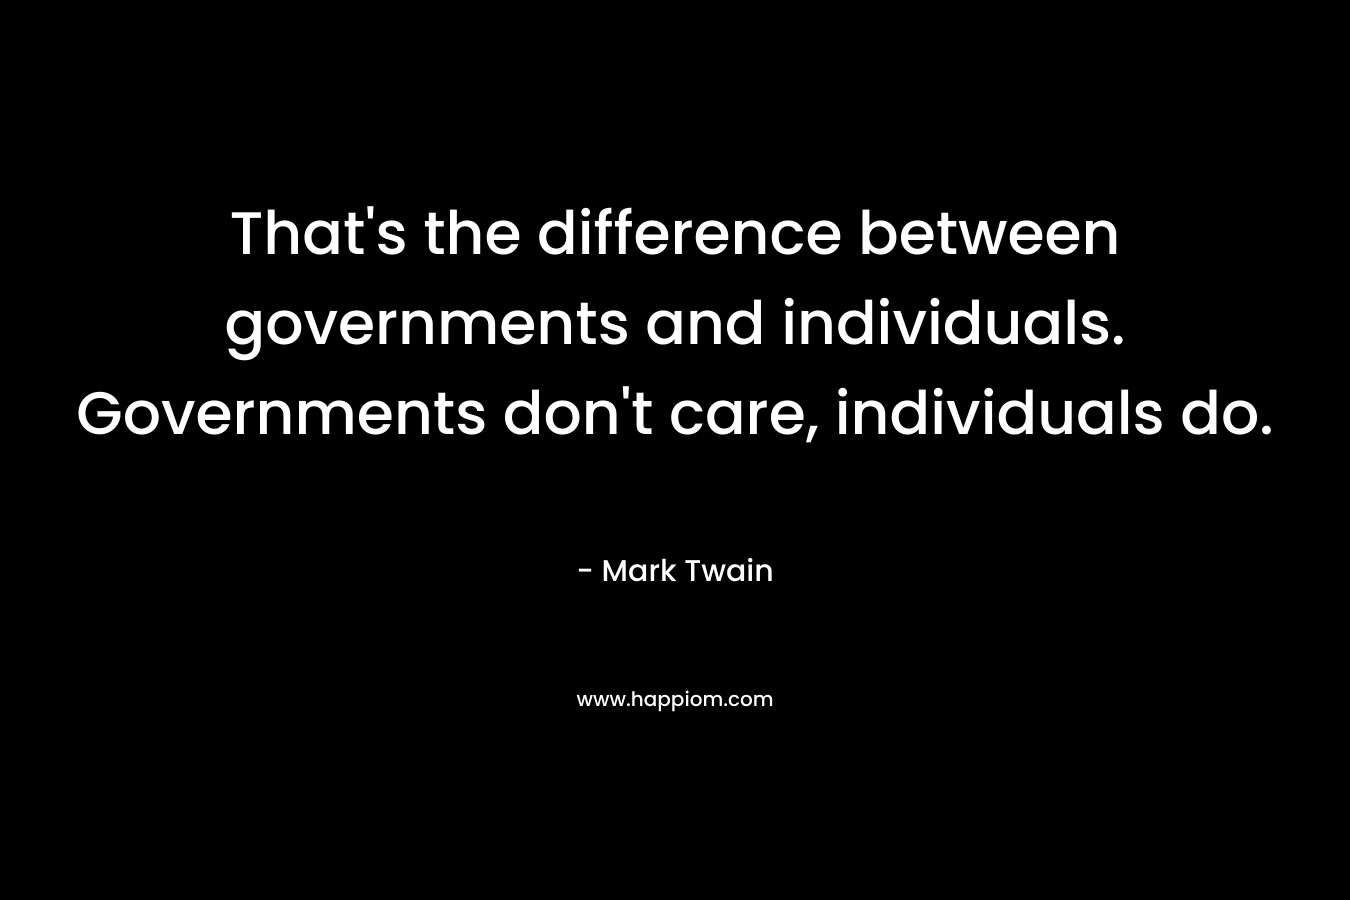 That's the difference between governments and individuals. Governments don't care, individuals do.